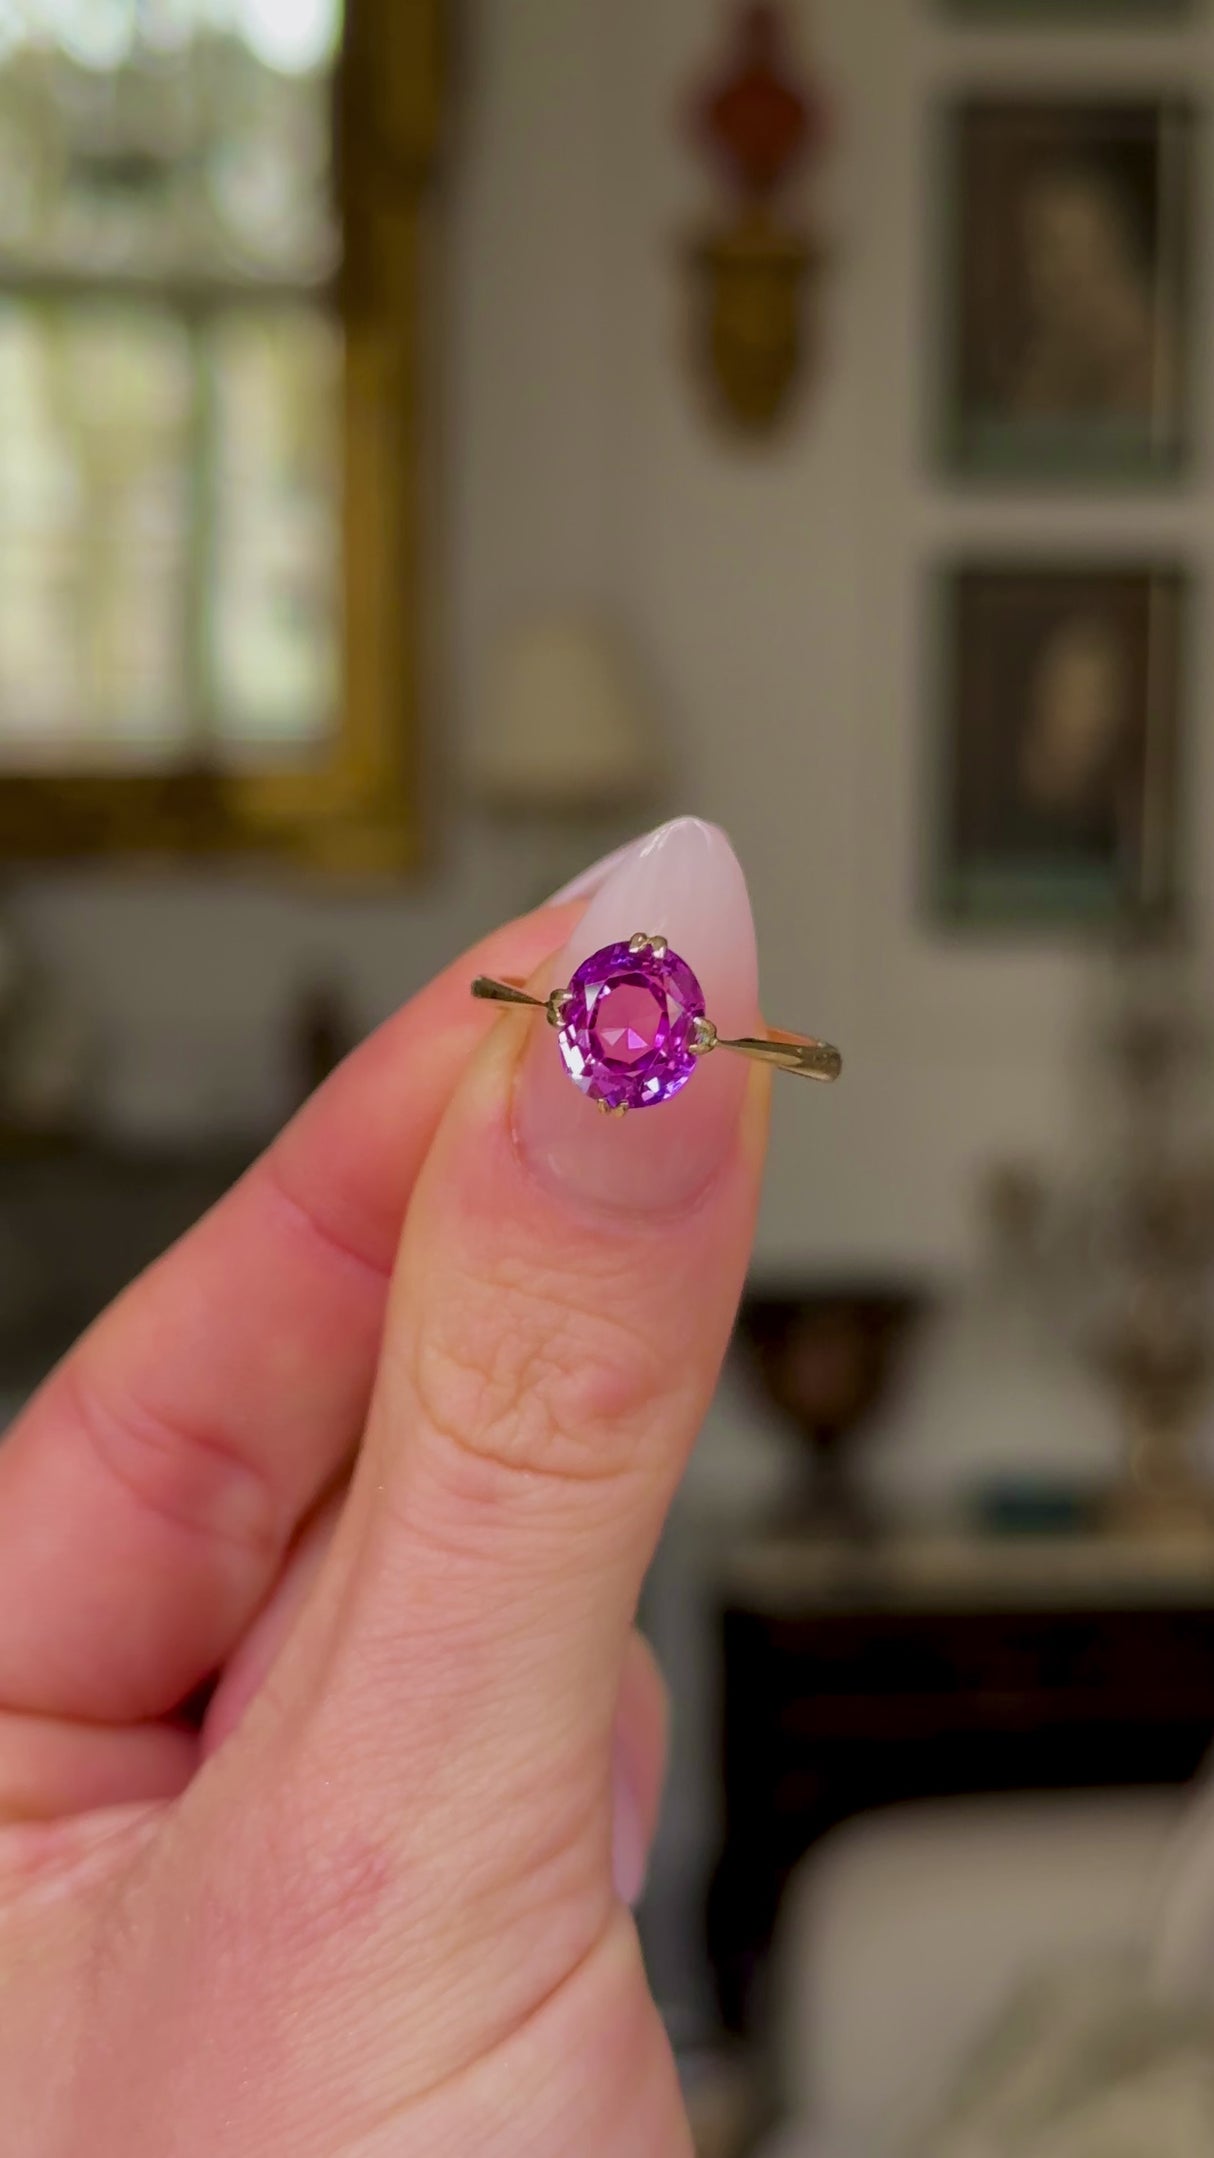 Vintage, 1940s Pink Sapphire Single-Stone Ring, held in fingers and rotated to give perspective.